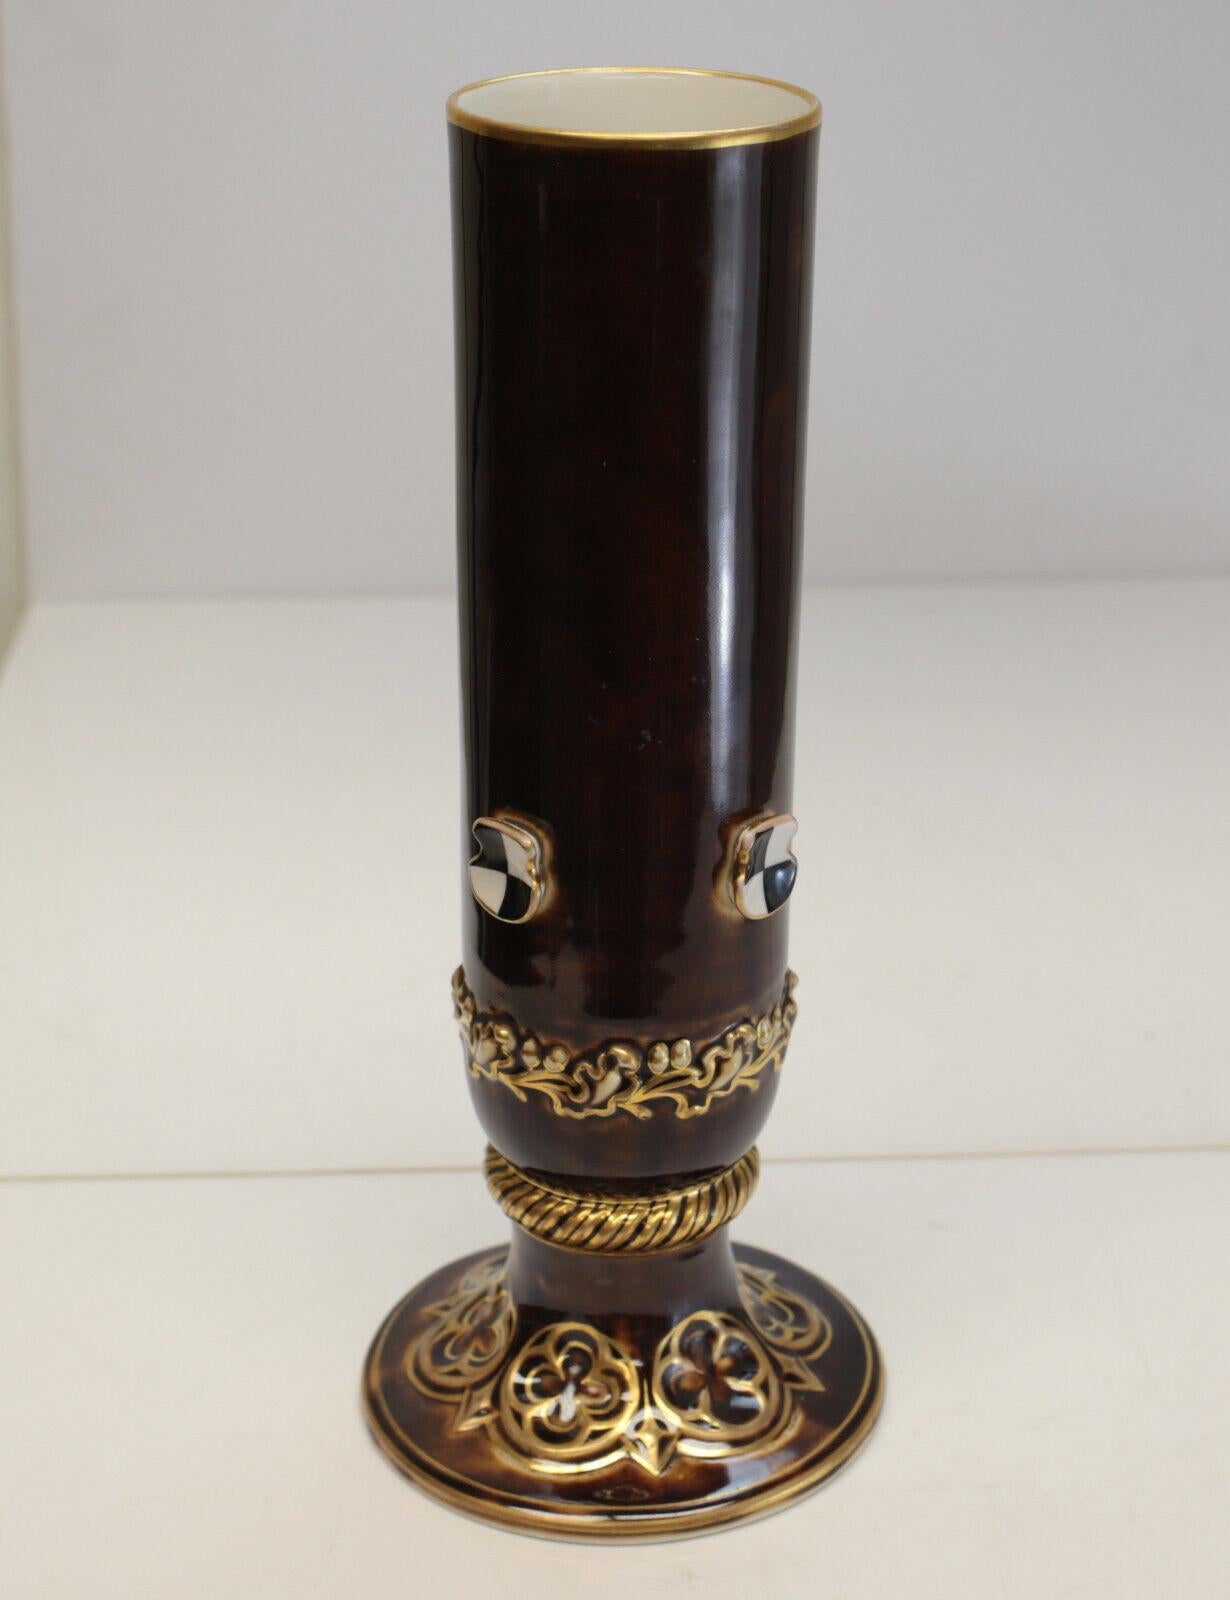 KPM Porcelain and Gilt vase, Applied Checkered Accents, circa 1850

Brown ground to the vase that mimics tortoise shell. Gilt leaf accents around the rim of the base and applied checkers towards the bottom. KPM mark to the underside.

Additional